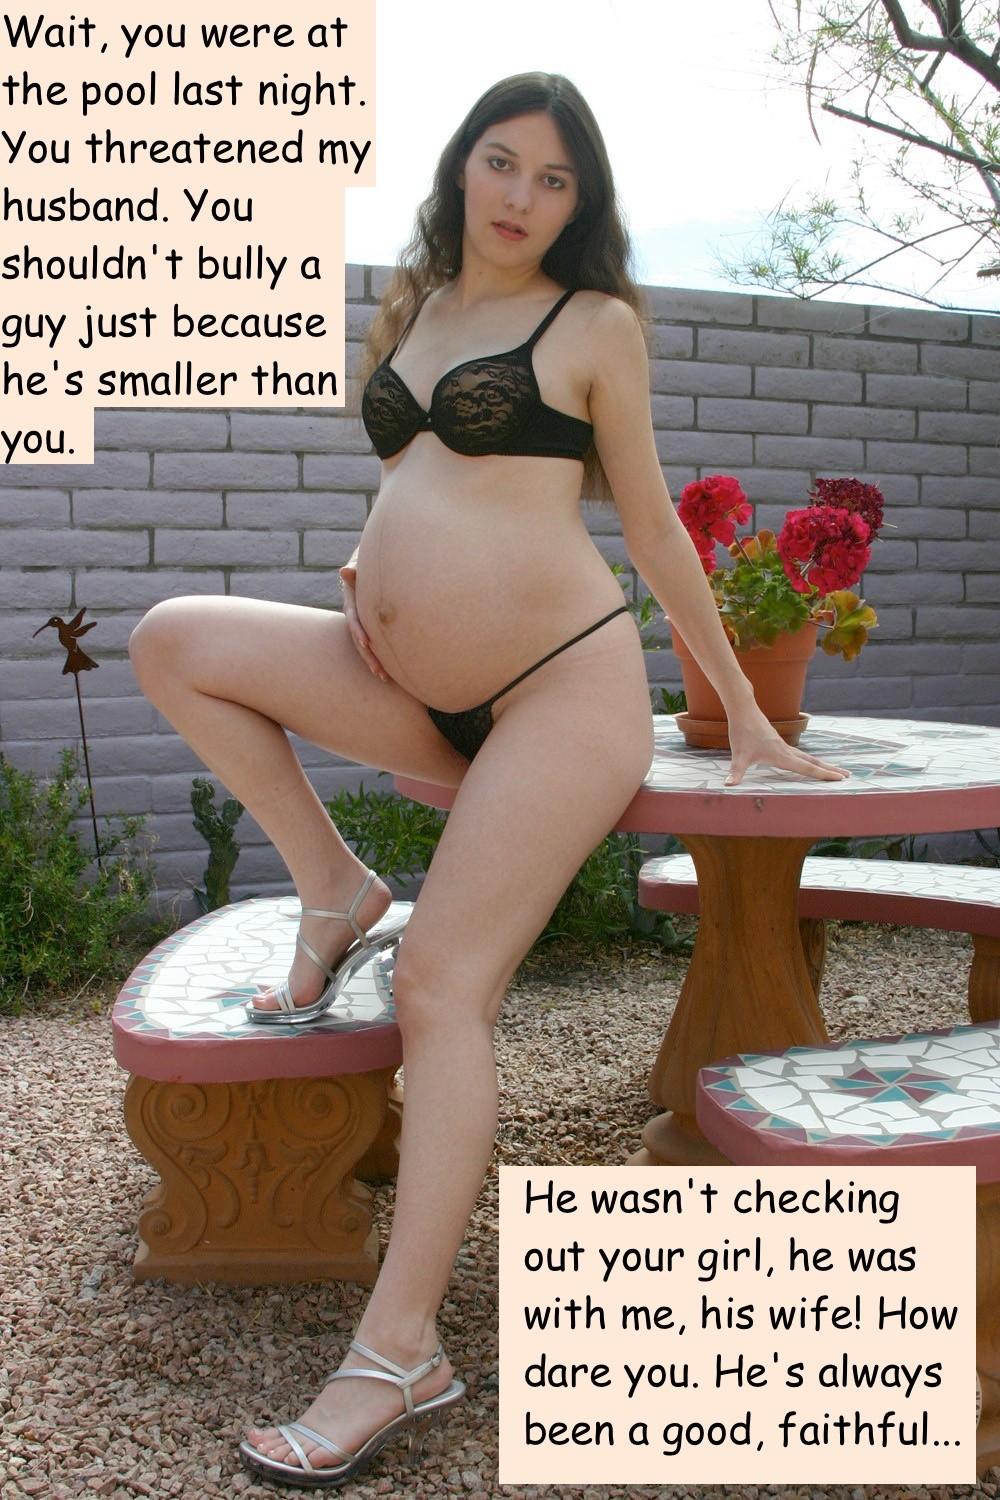 Pregnent interracial sex story photo